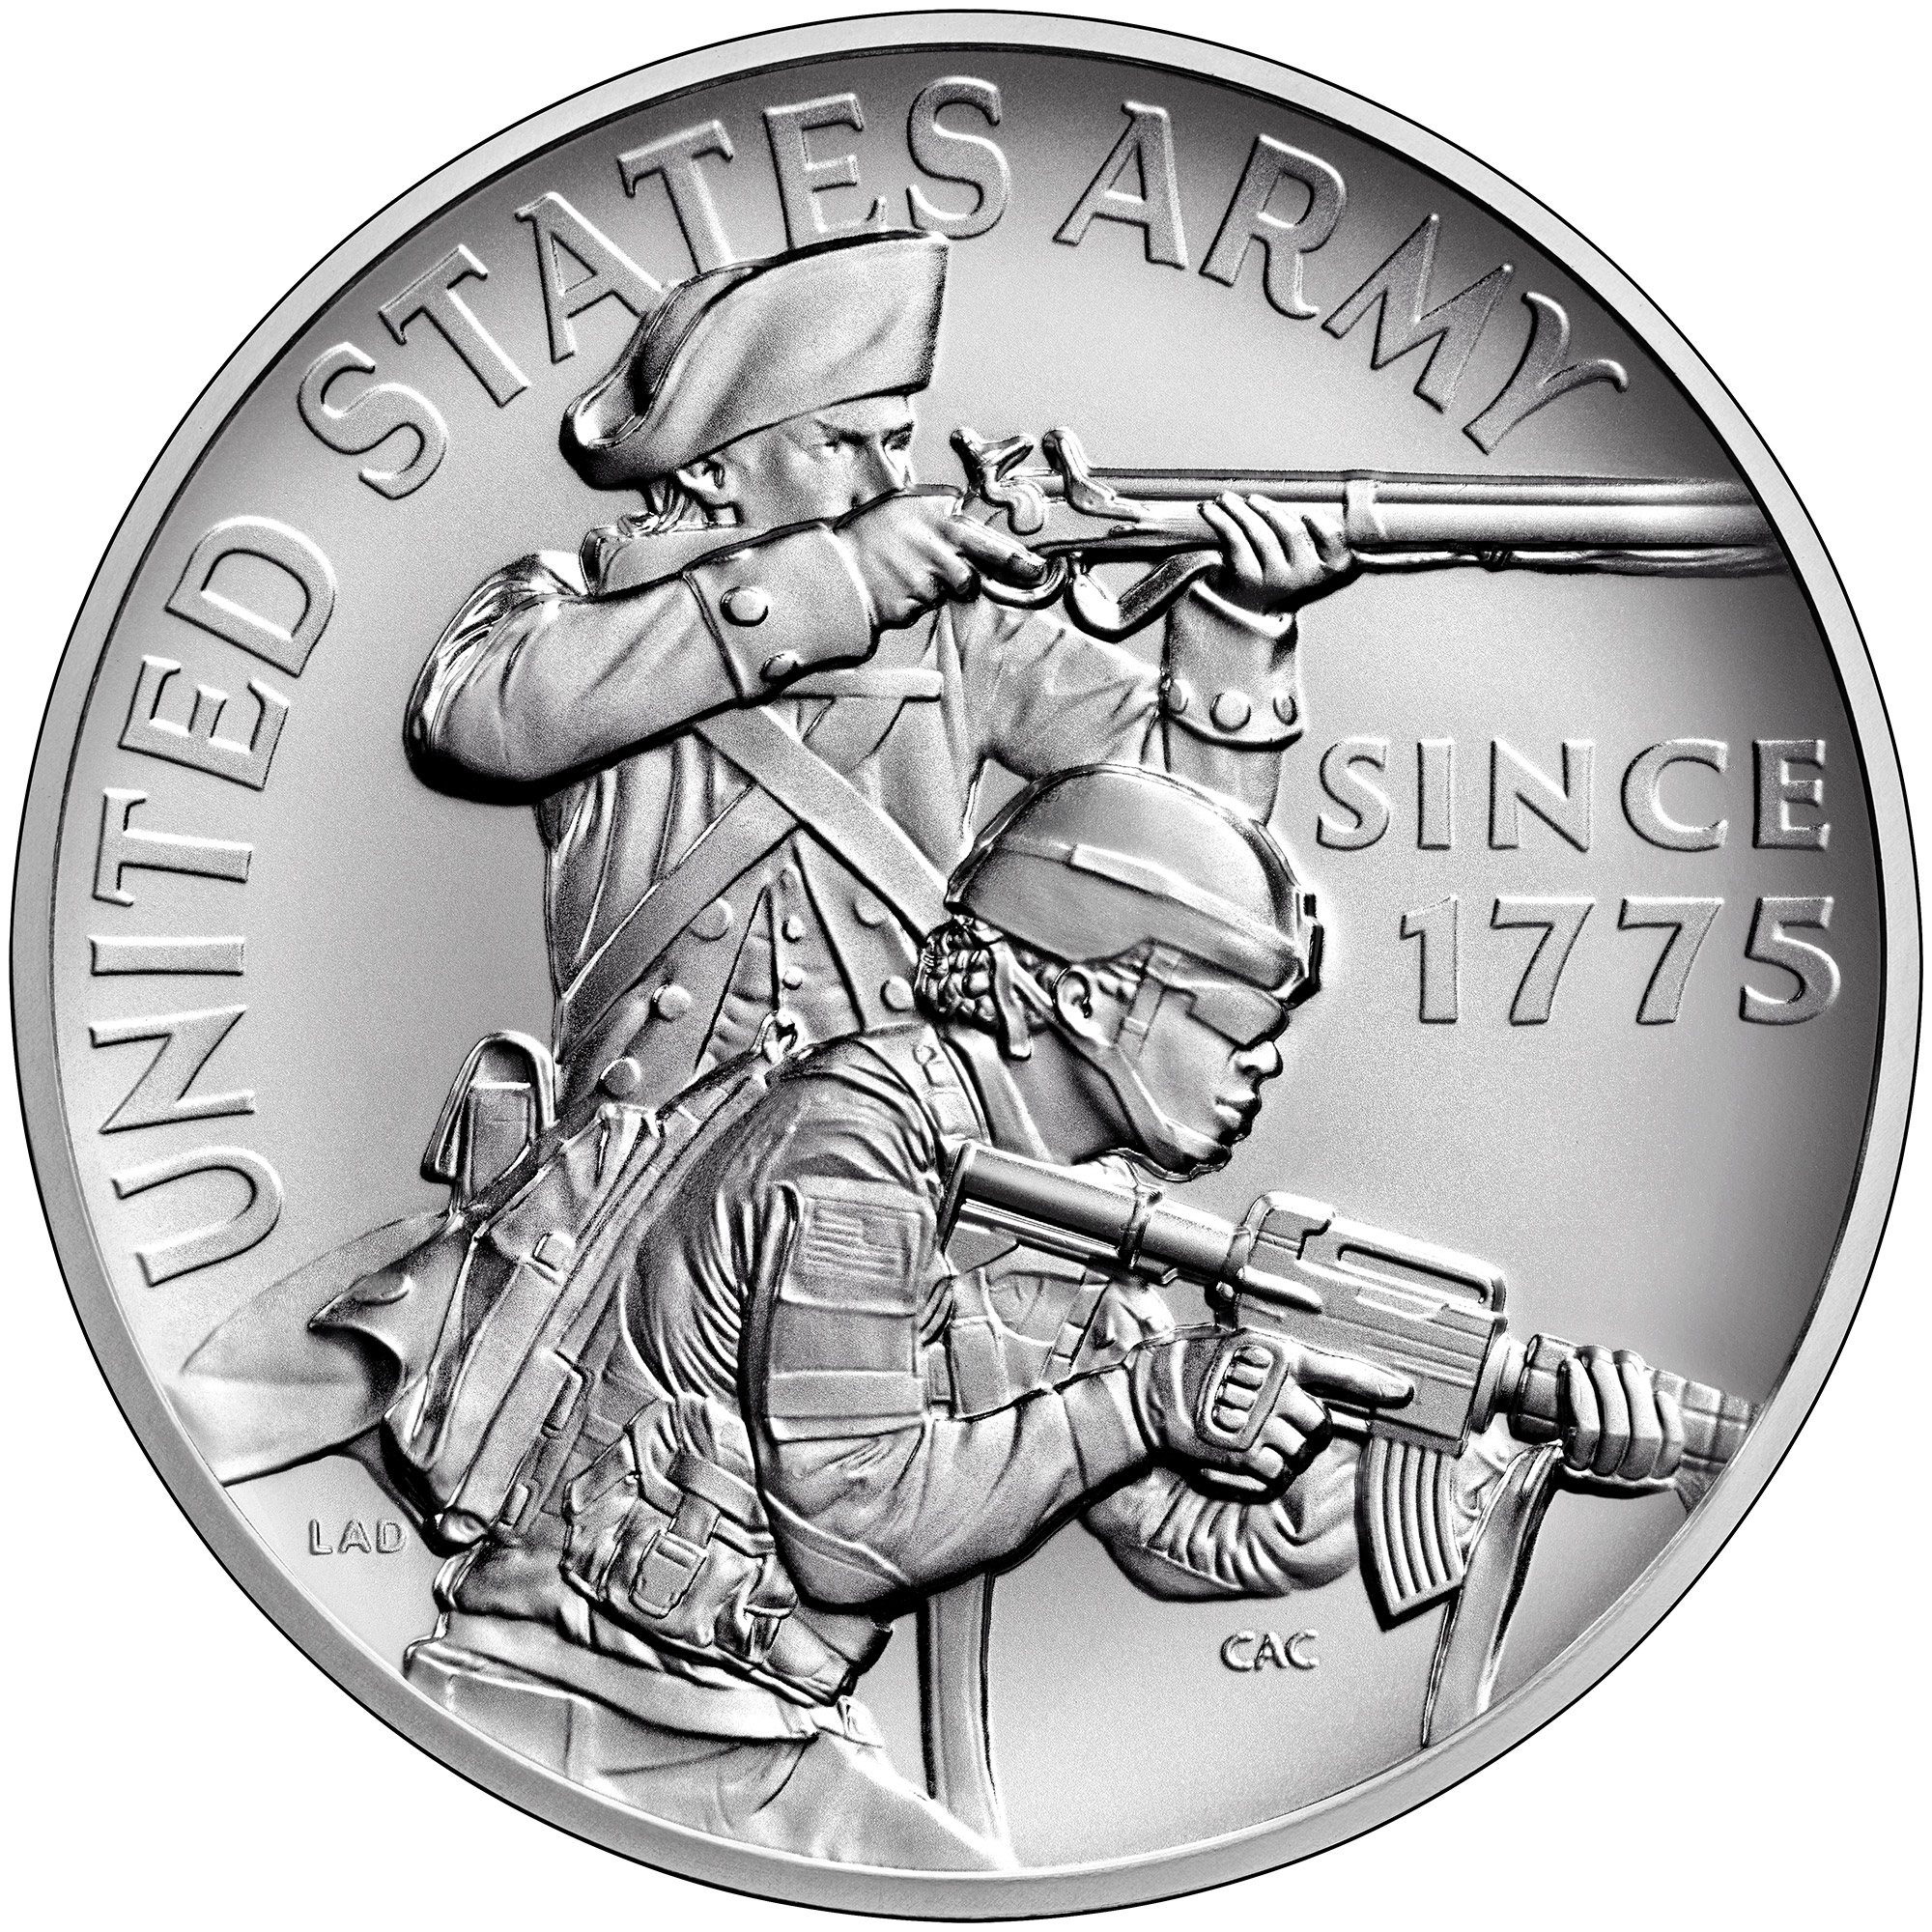 U.S. Army One Ounce Silver Medal